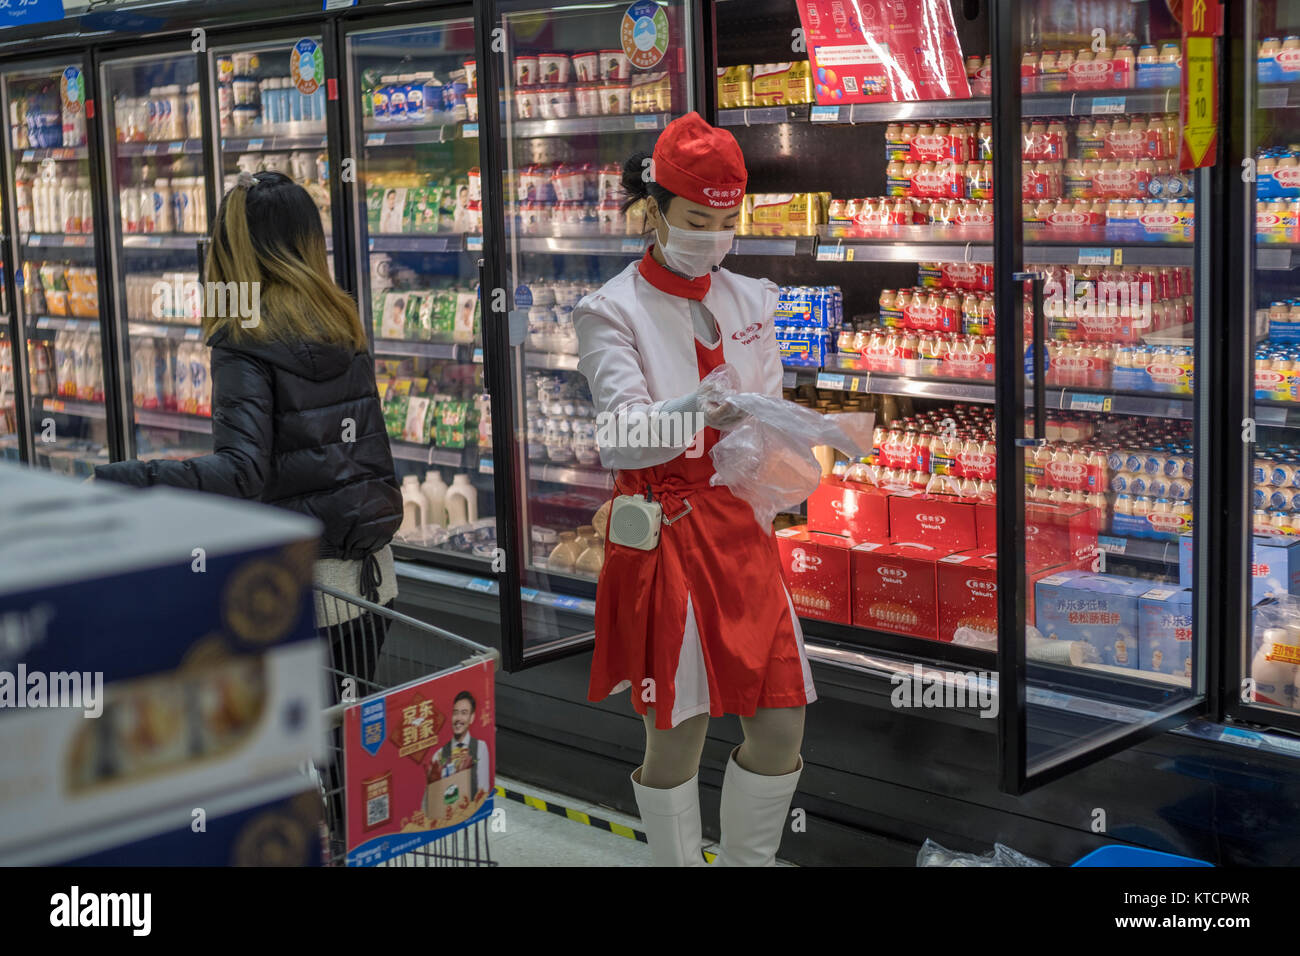 Dairy products are on sale in a Wal-Mart supercenter in Beijing, China. Stock Photo